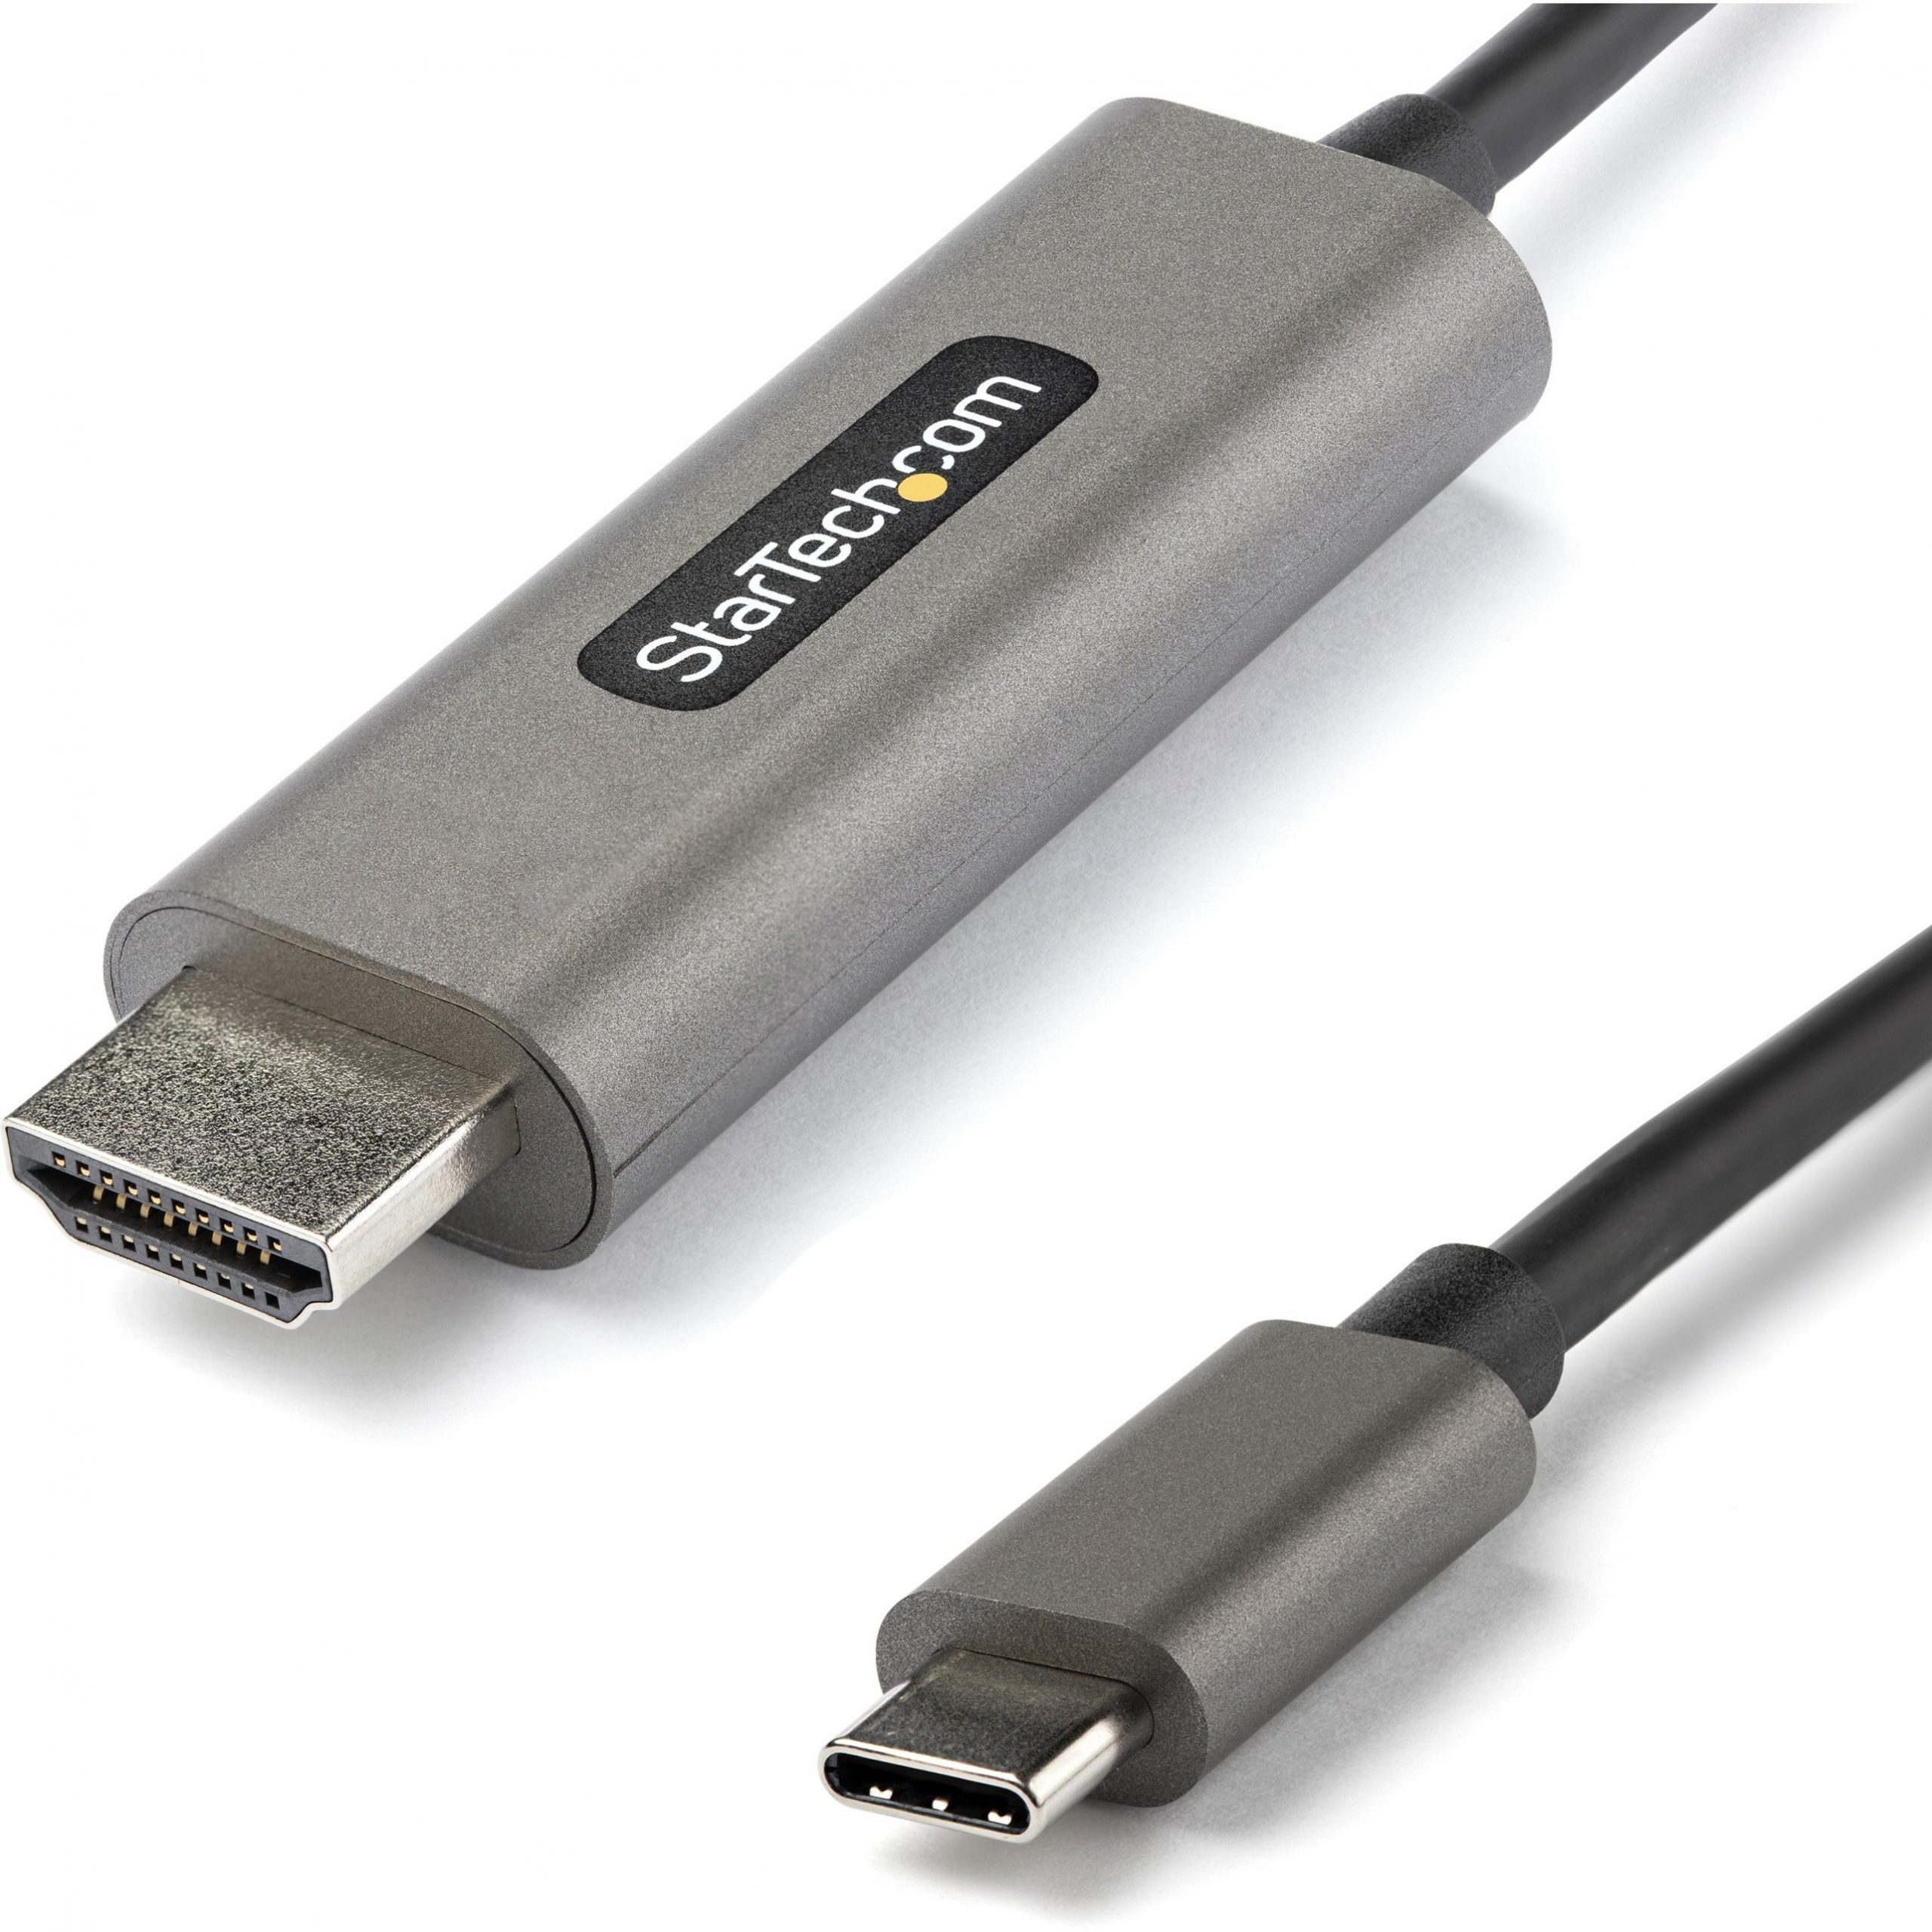 6ft Mini HDMI to HDMI Cable Adapter 4K - HDMI® Cables & HDMI Adapters